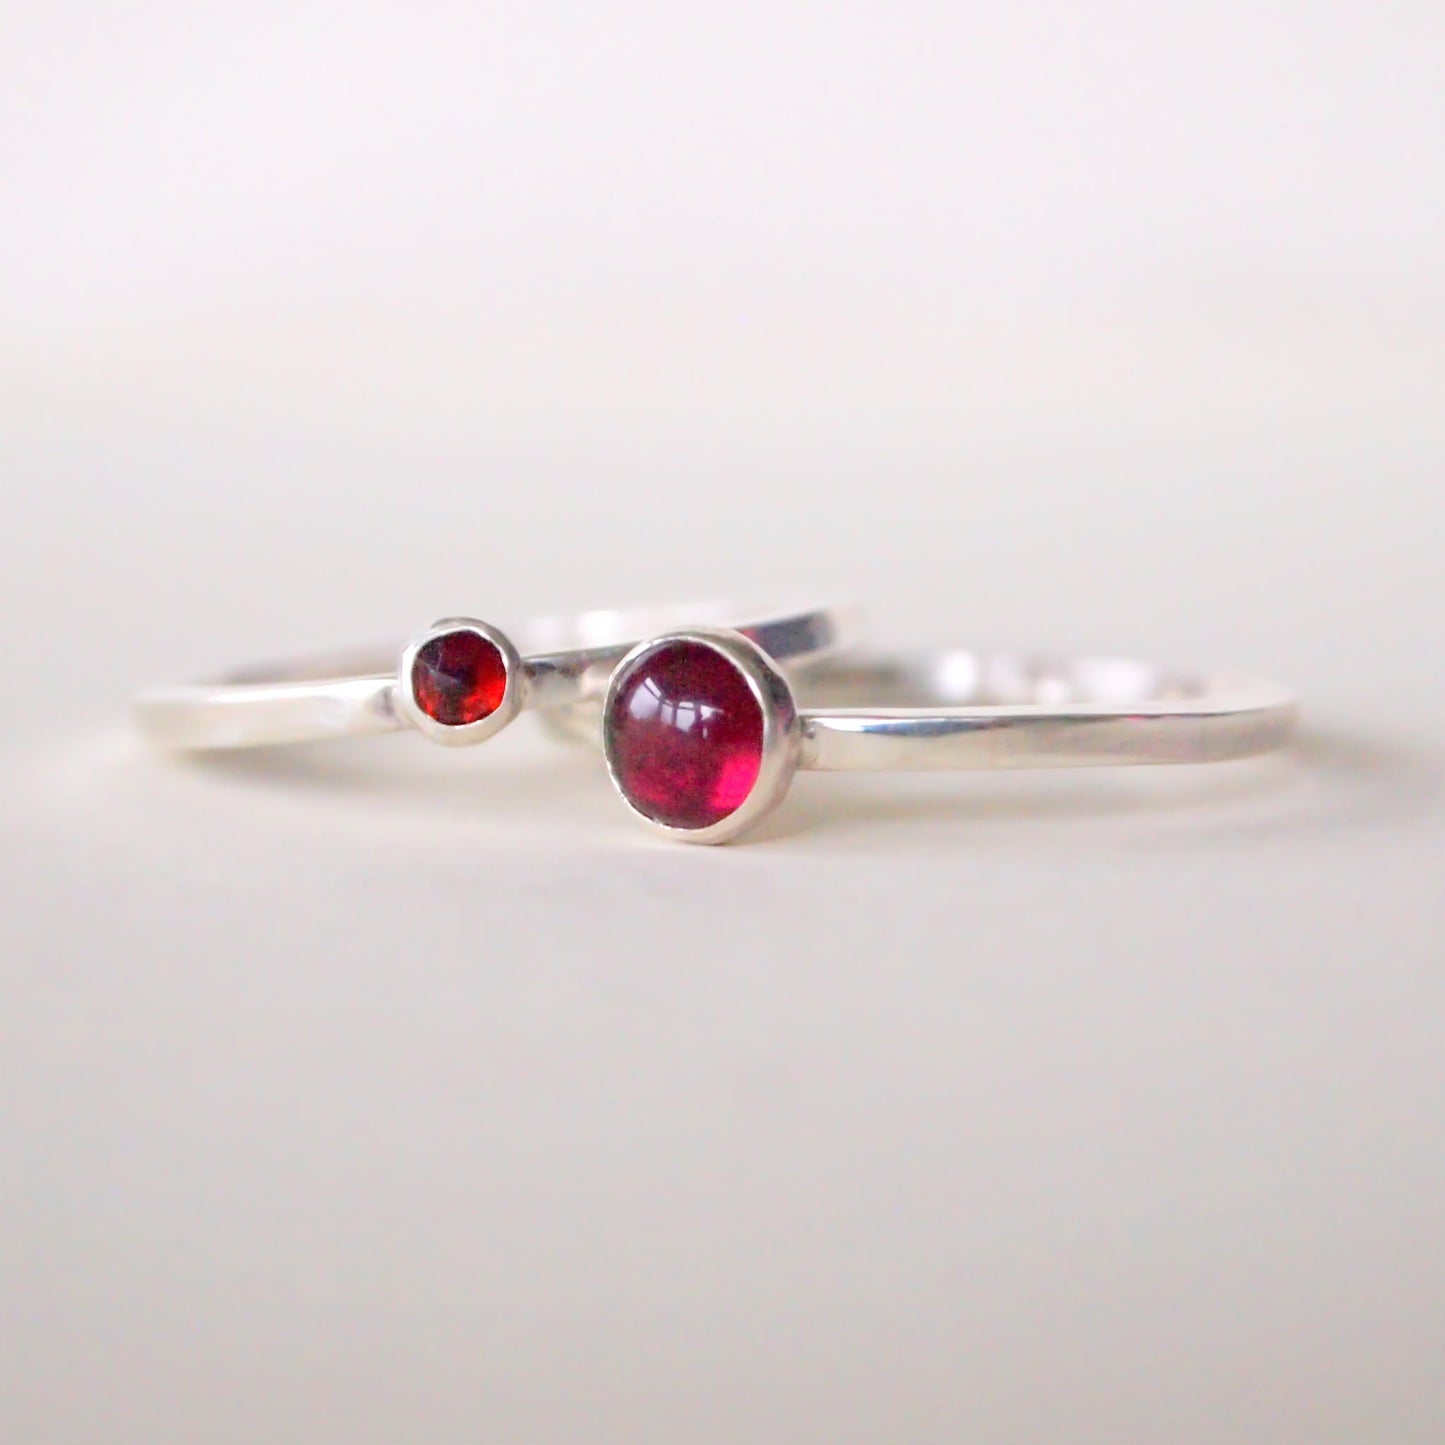 Sterling Silver double stacking ring set . One ring has a 5mm round garnet with the second having a smaller 3mm faceted stone. Handcrafted birthstone jewellery made in Scotland UK